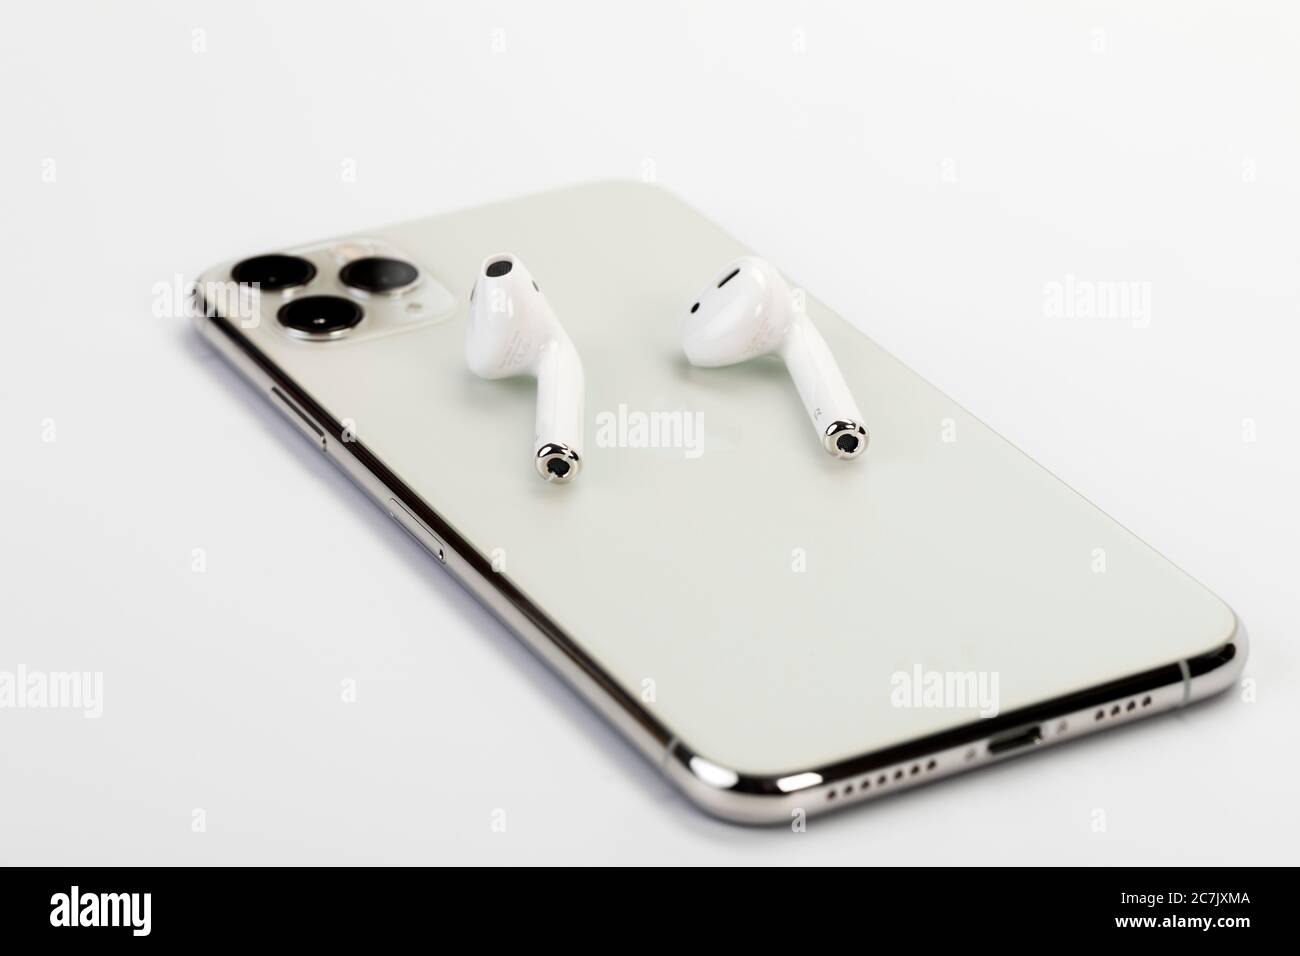 Apple Iphone 11 Pro Max Back Three Camera System Airpods 2 White Background Stock Photo Alamy